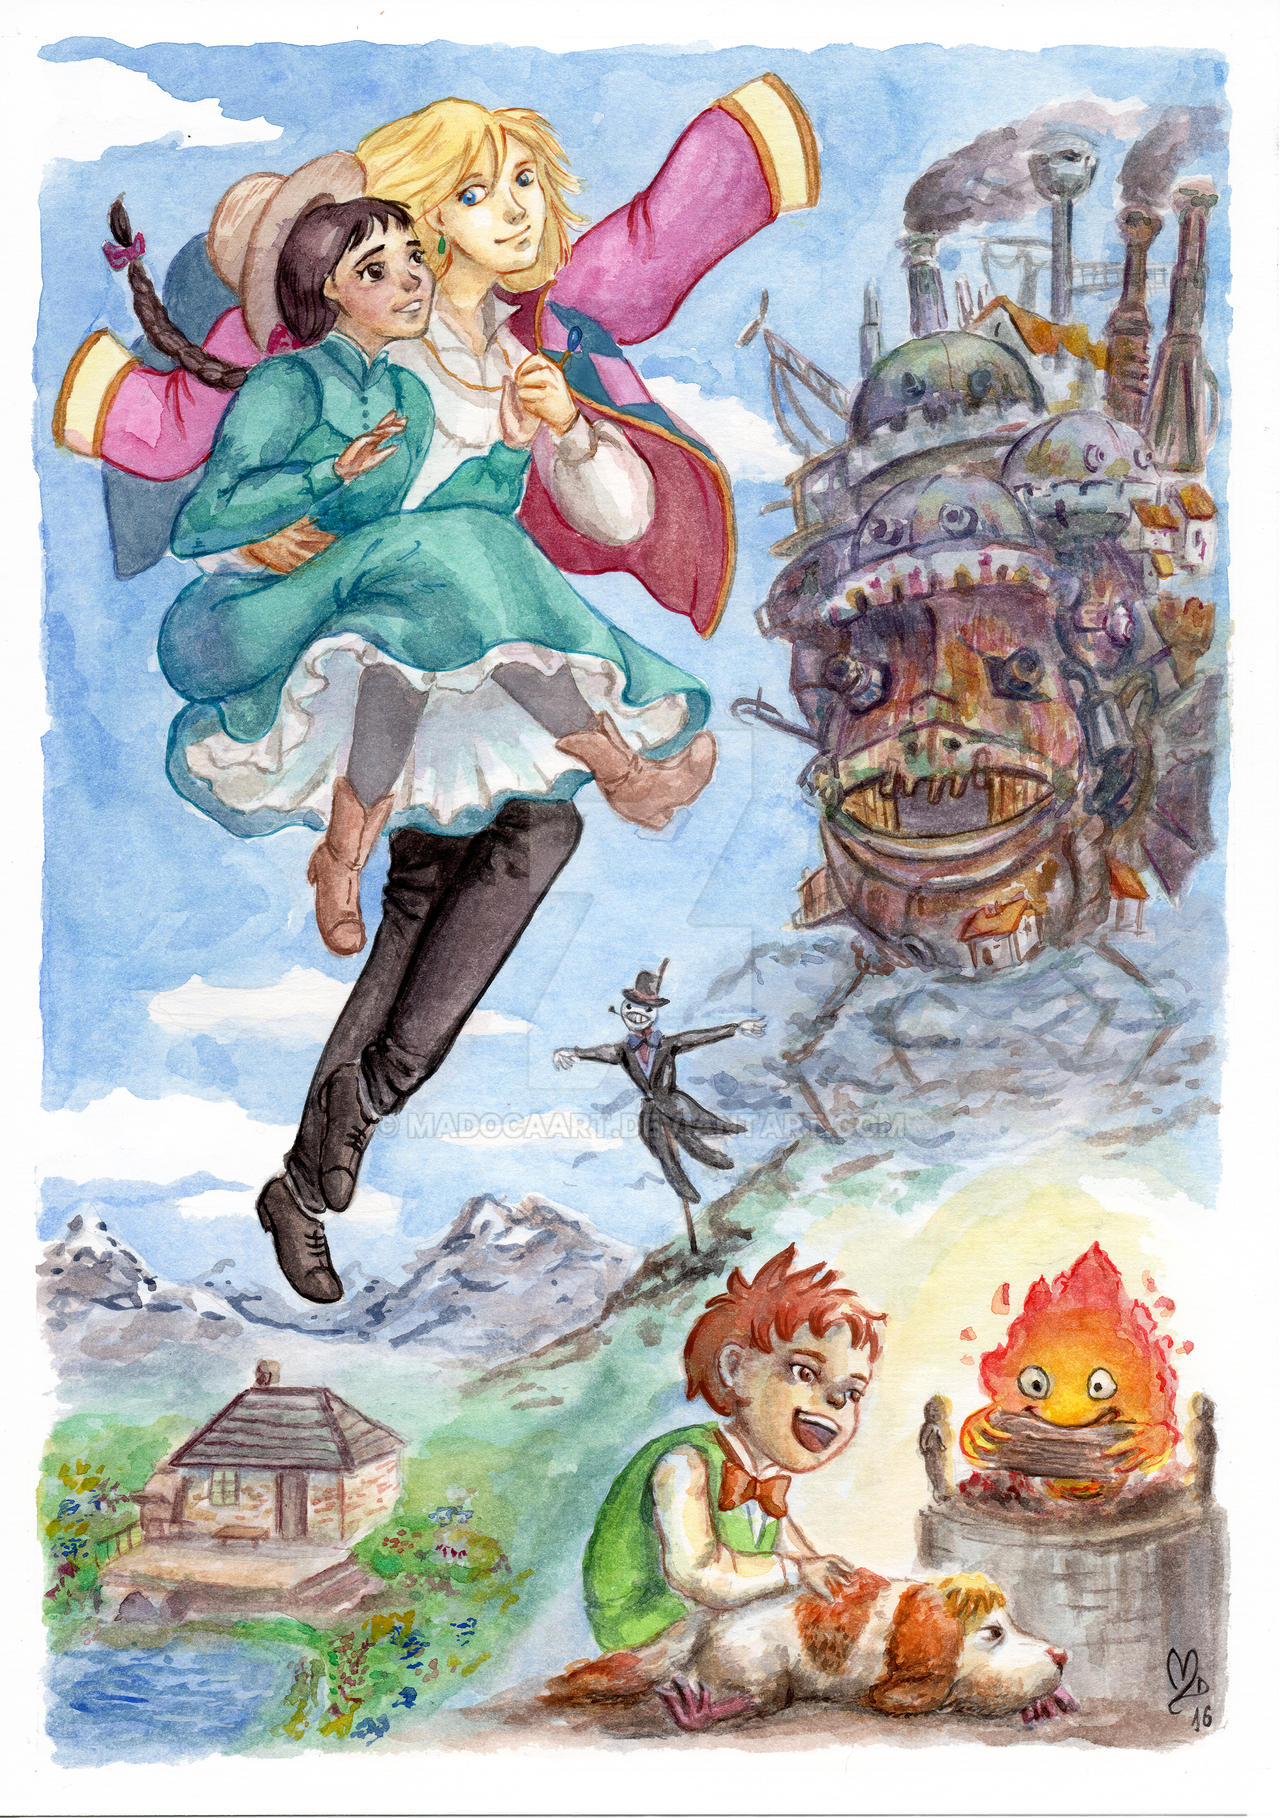 Howl's moving castle by MadocaArt on DeviantArt